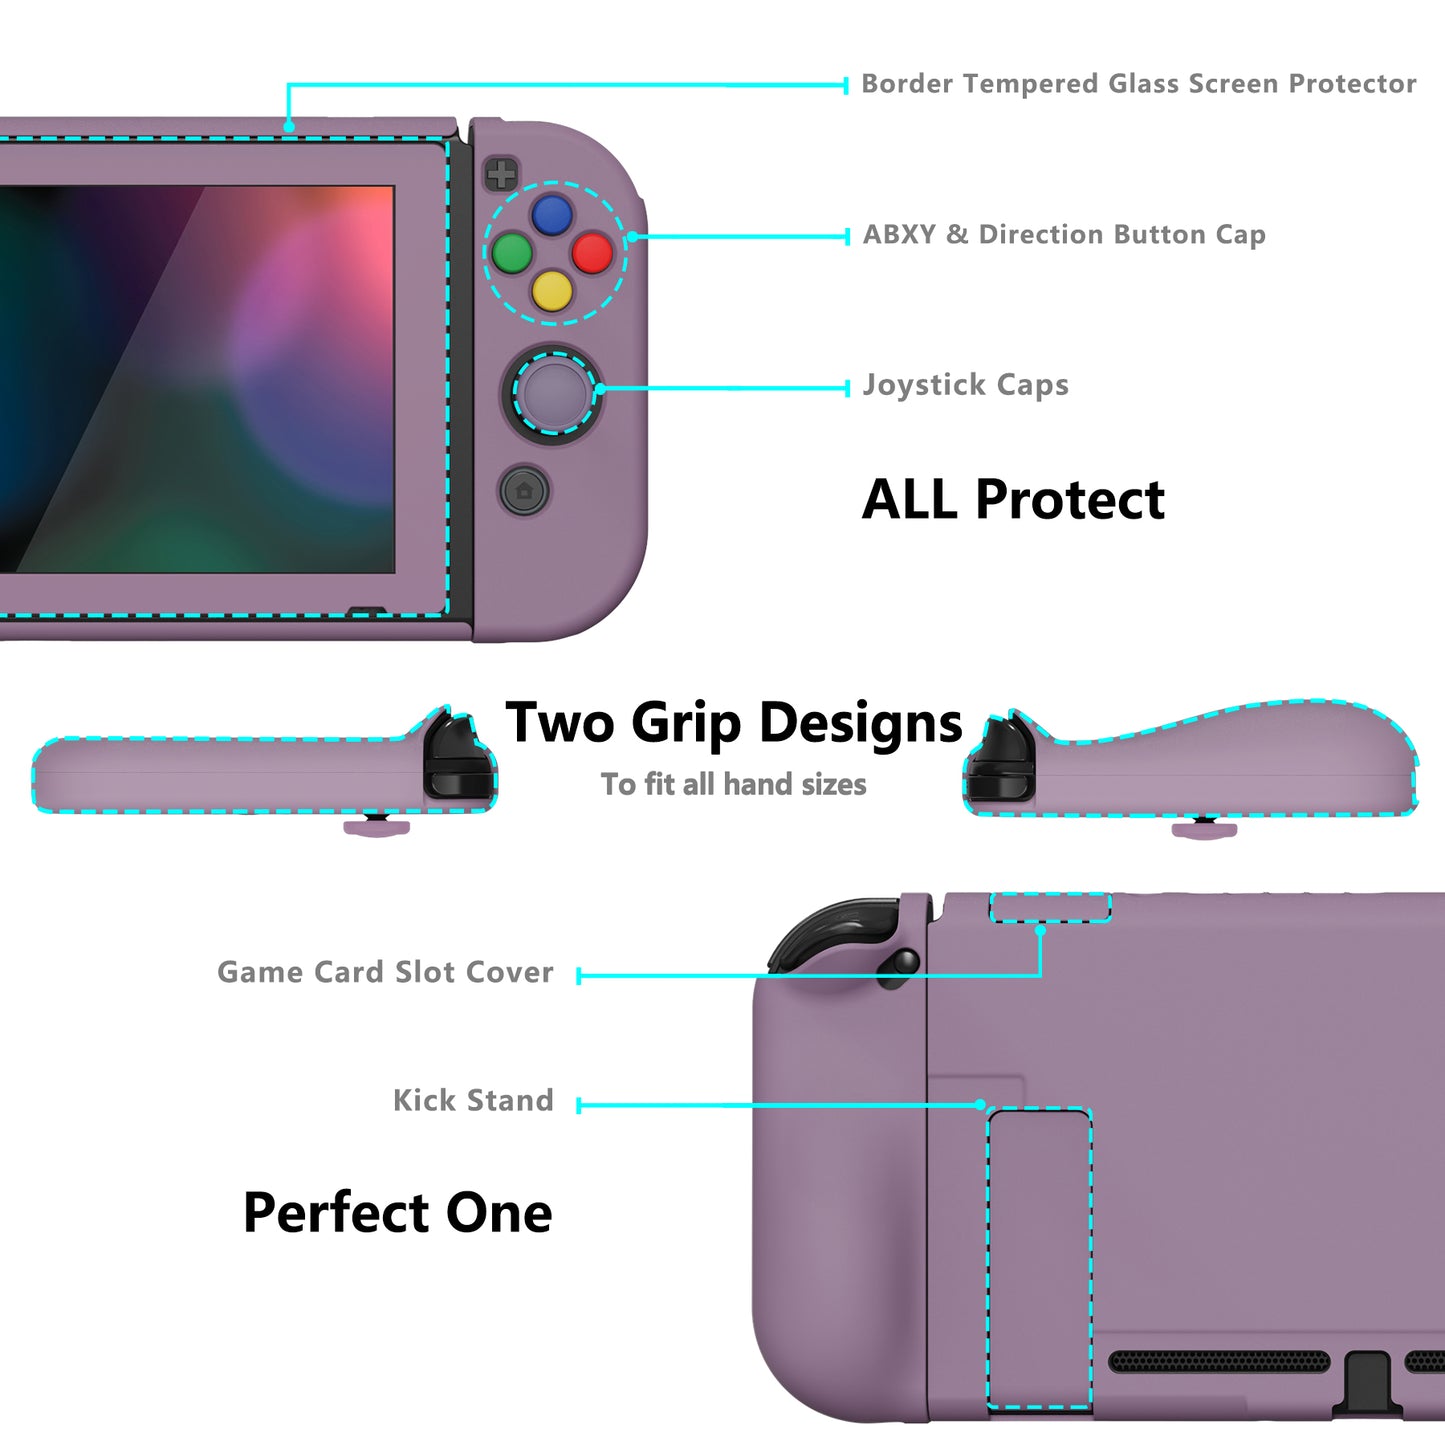 PlayVital AlterGrips Dockable Protective Case Ergonomic Grip Cover for Nintendo Switch, Interchangeable Joycon Cover w/Screen Protector & Thumb Grip Caps & Button Caps - Dark Grayish Violet - TNSYP3006 playvital